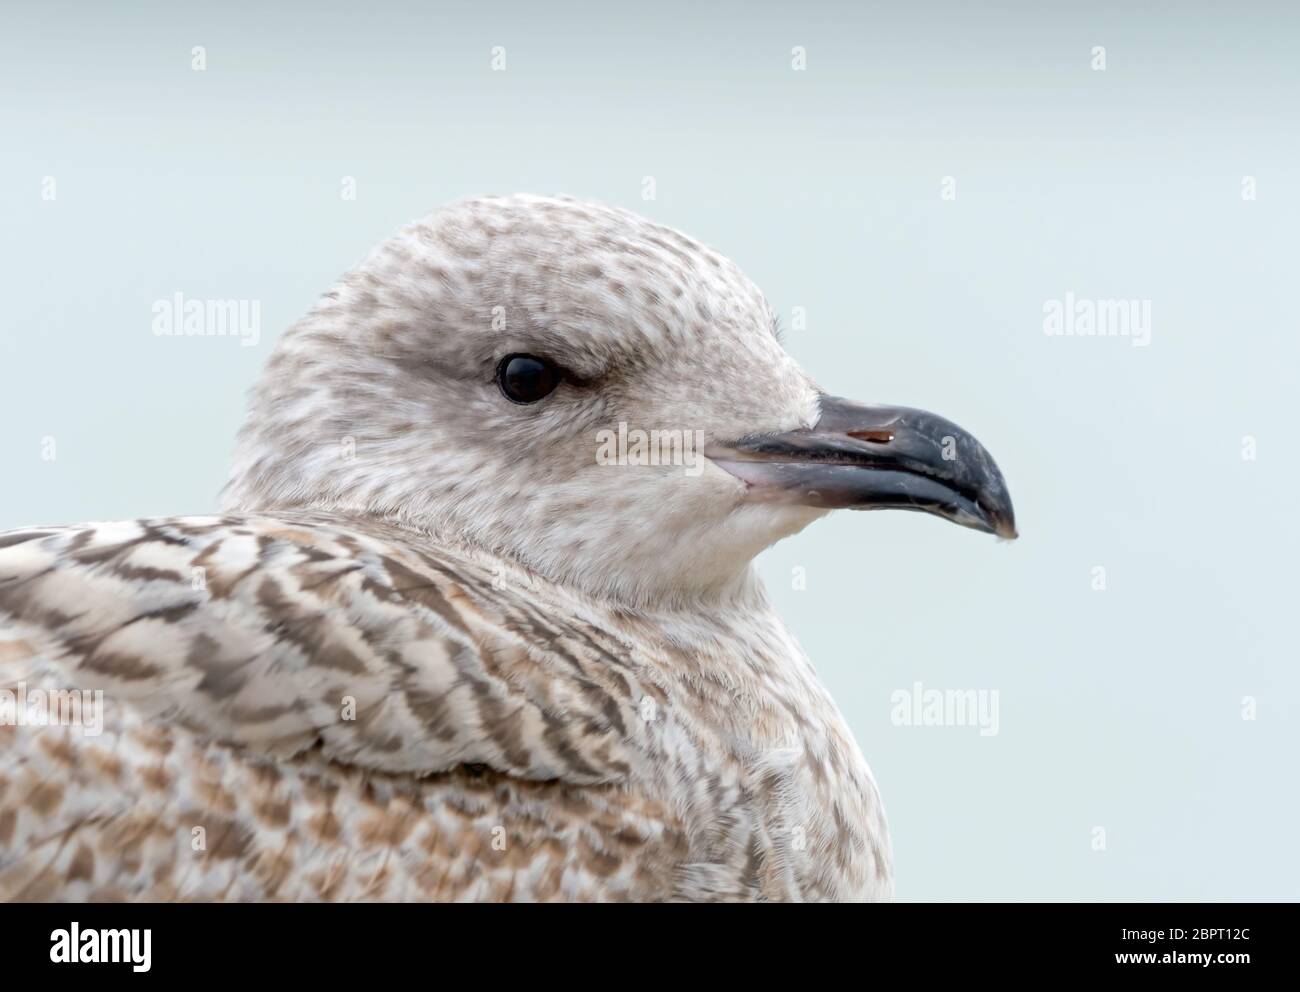 Juvenile Herring Gull head shot with speckled plumage. Stock Photo